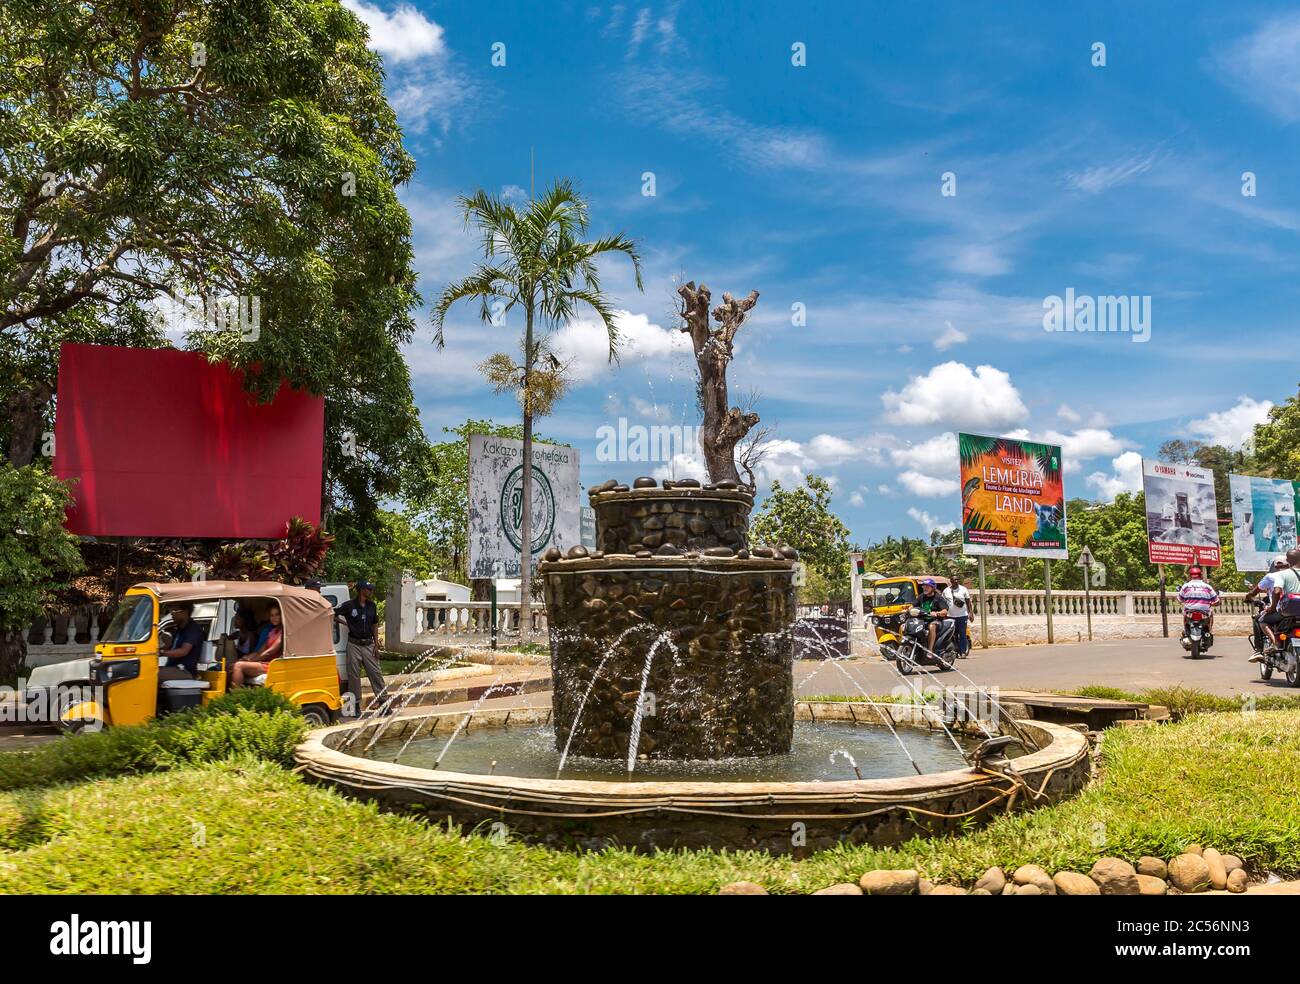 Fountain, street scene in Andoany, Hell-Ville, Nosy Bé Island, Madagascar, Africa, Indian Ocean Stock Photo